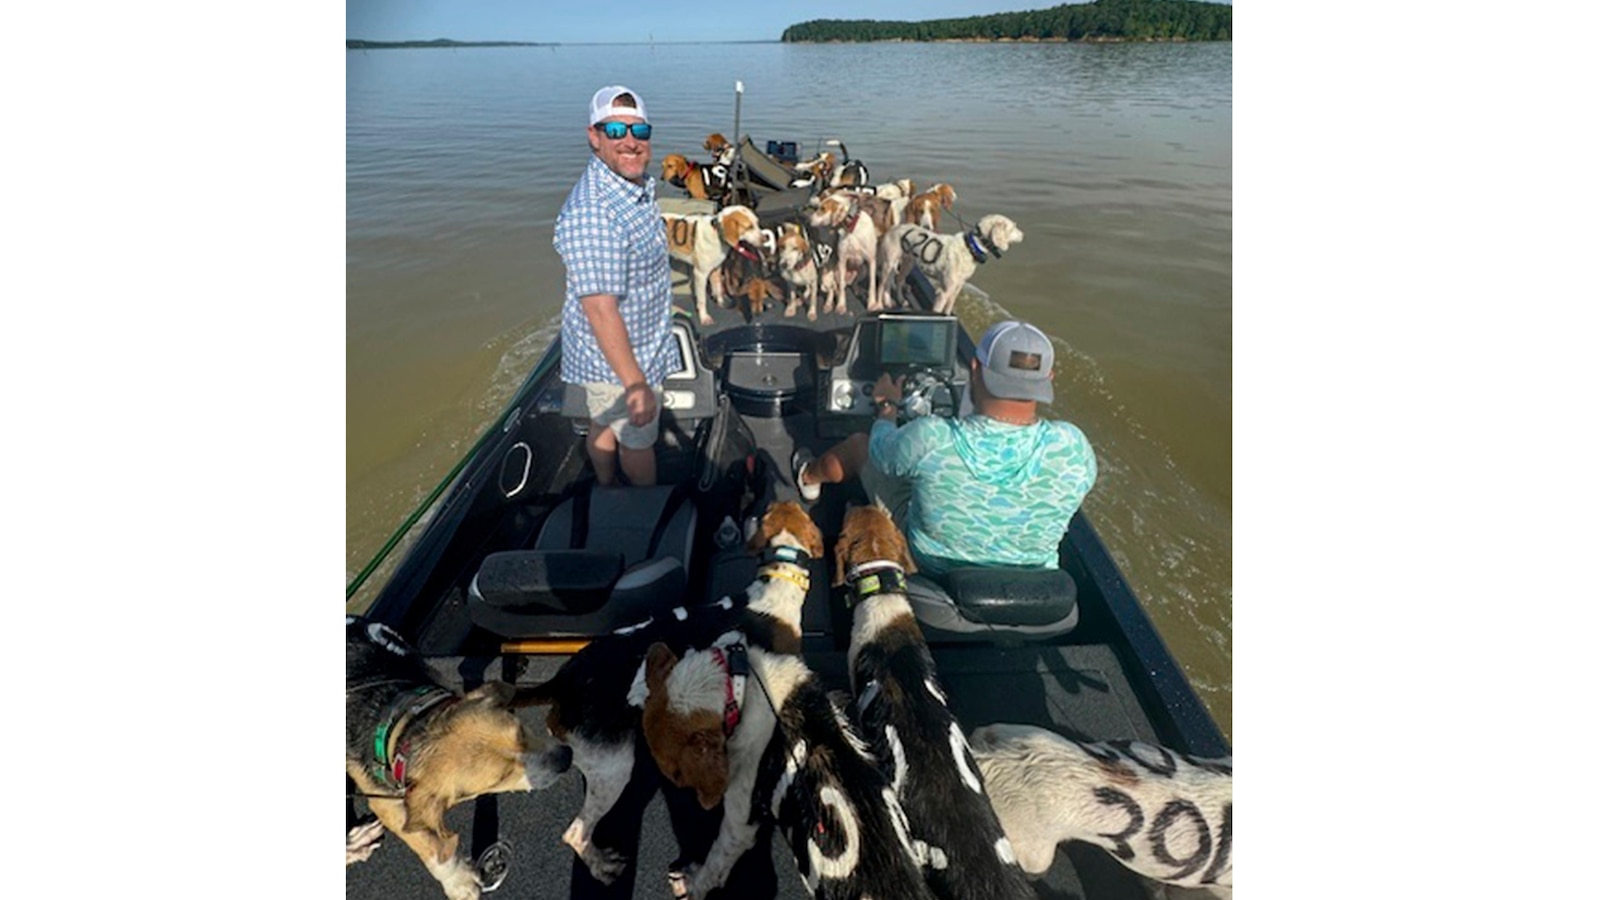 Rescue of 38 dogs from drowning on Mississippi lake by quick-thinking fishermen